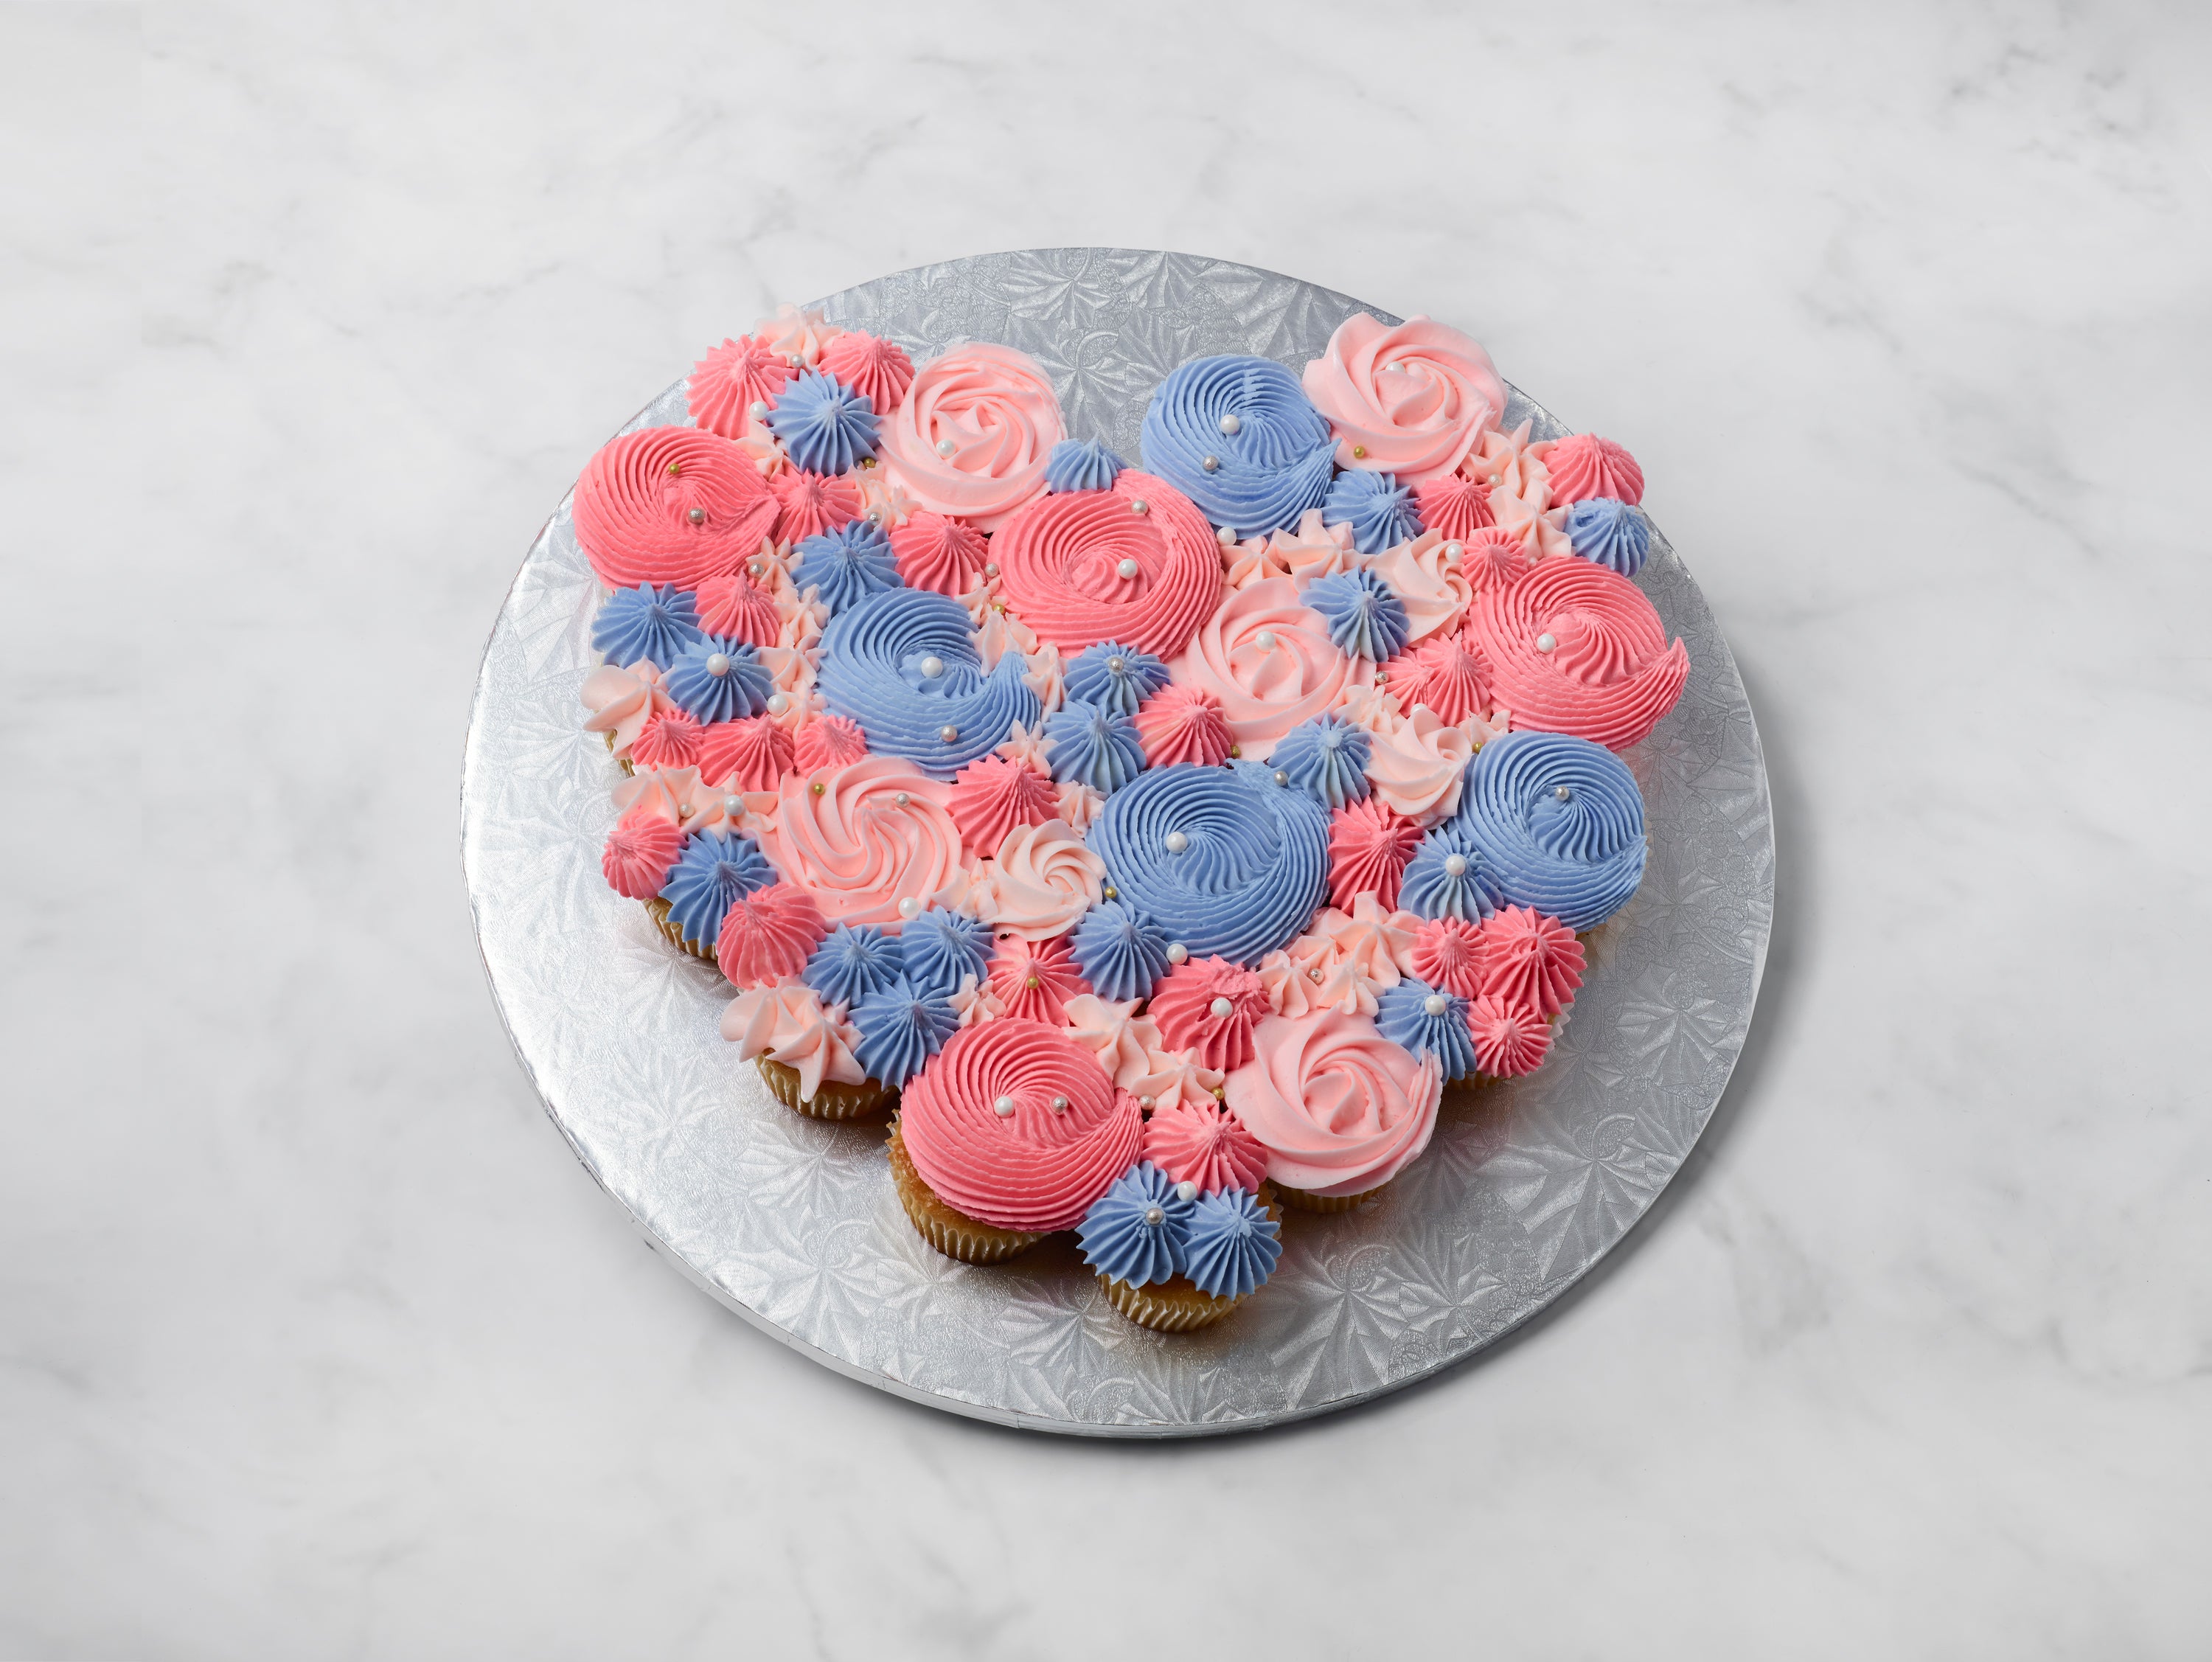 Celebrate Your Anniversary with Heart Shaped Cake | Yummy Cake